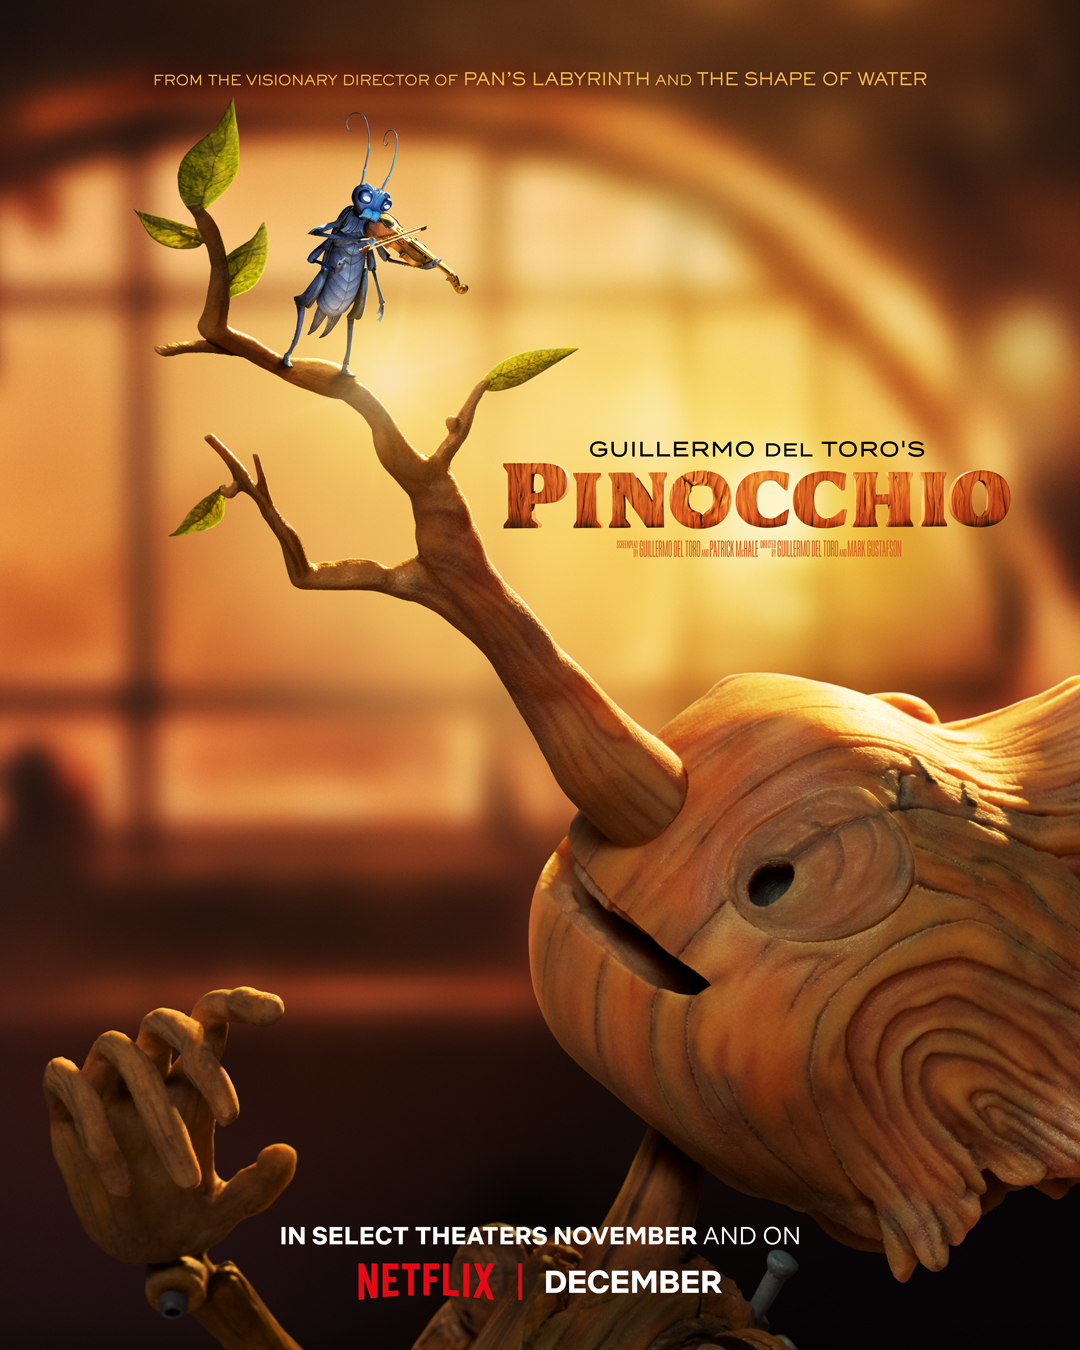 Mexican director Guillermo del Toro will present a behind-the-scenes look at the animated Pinocchio movie.